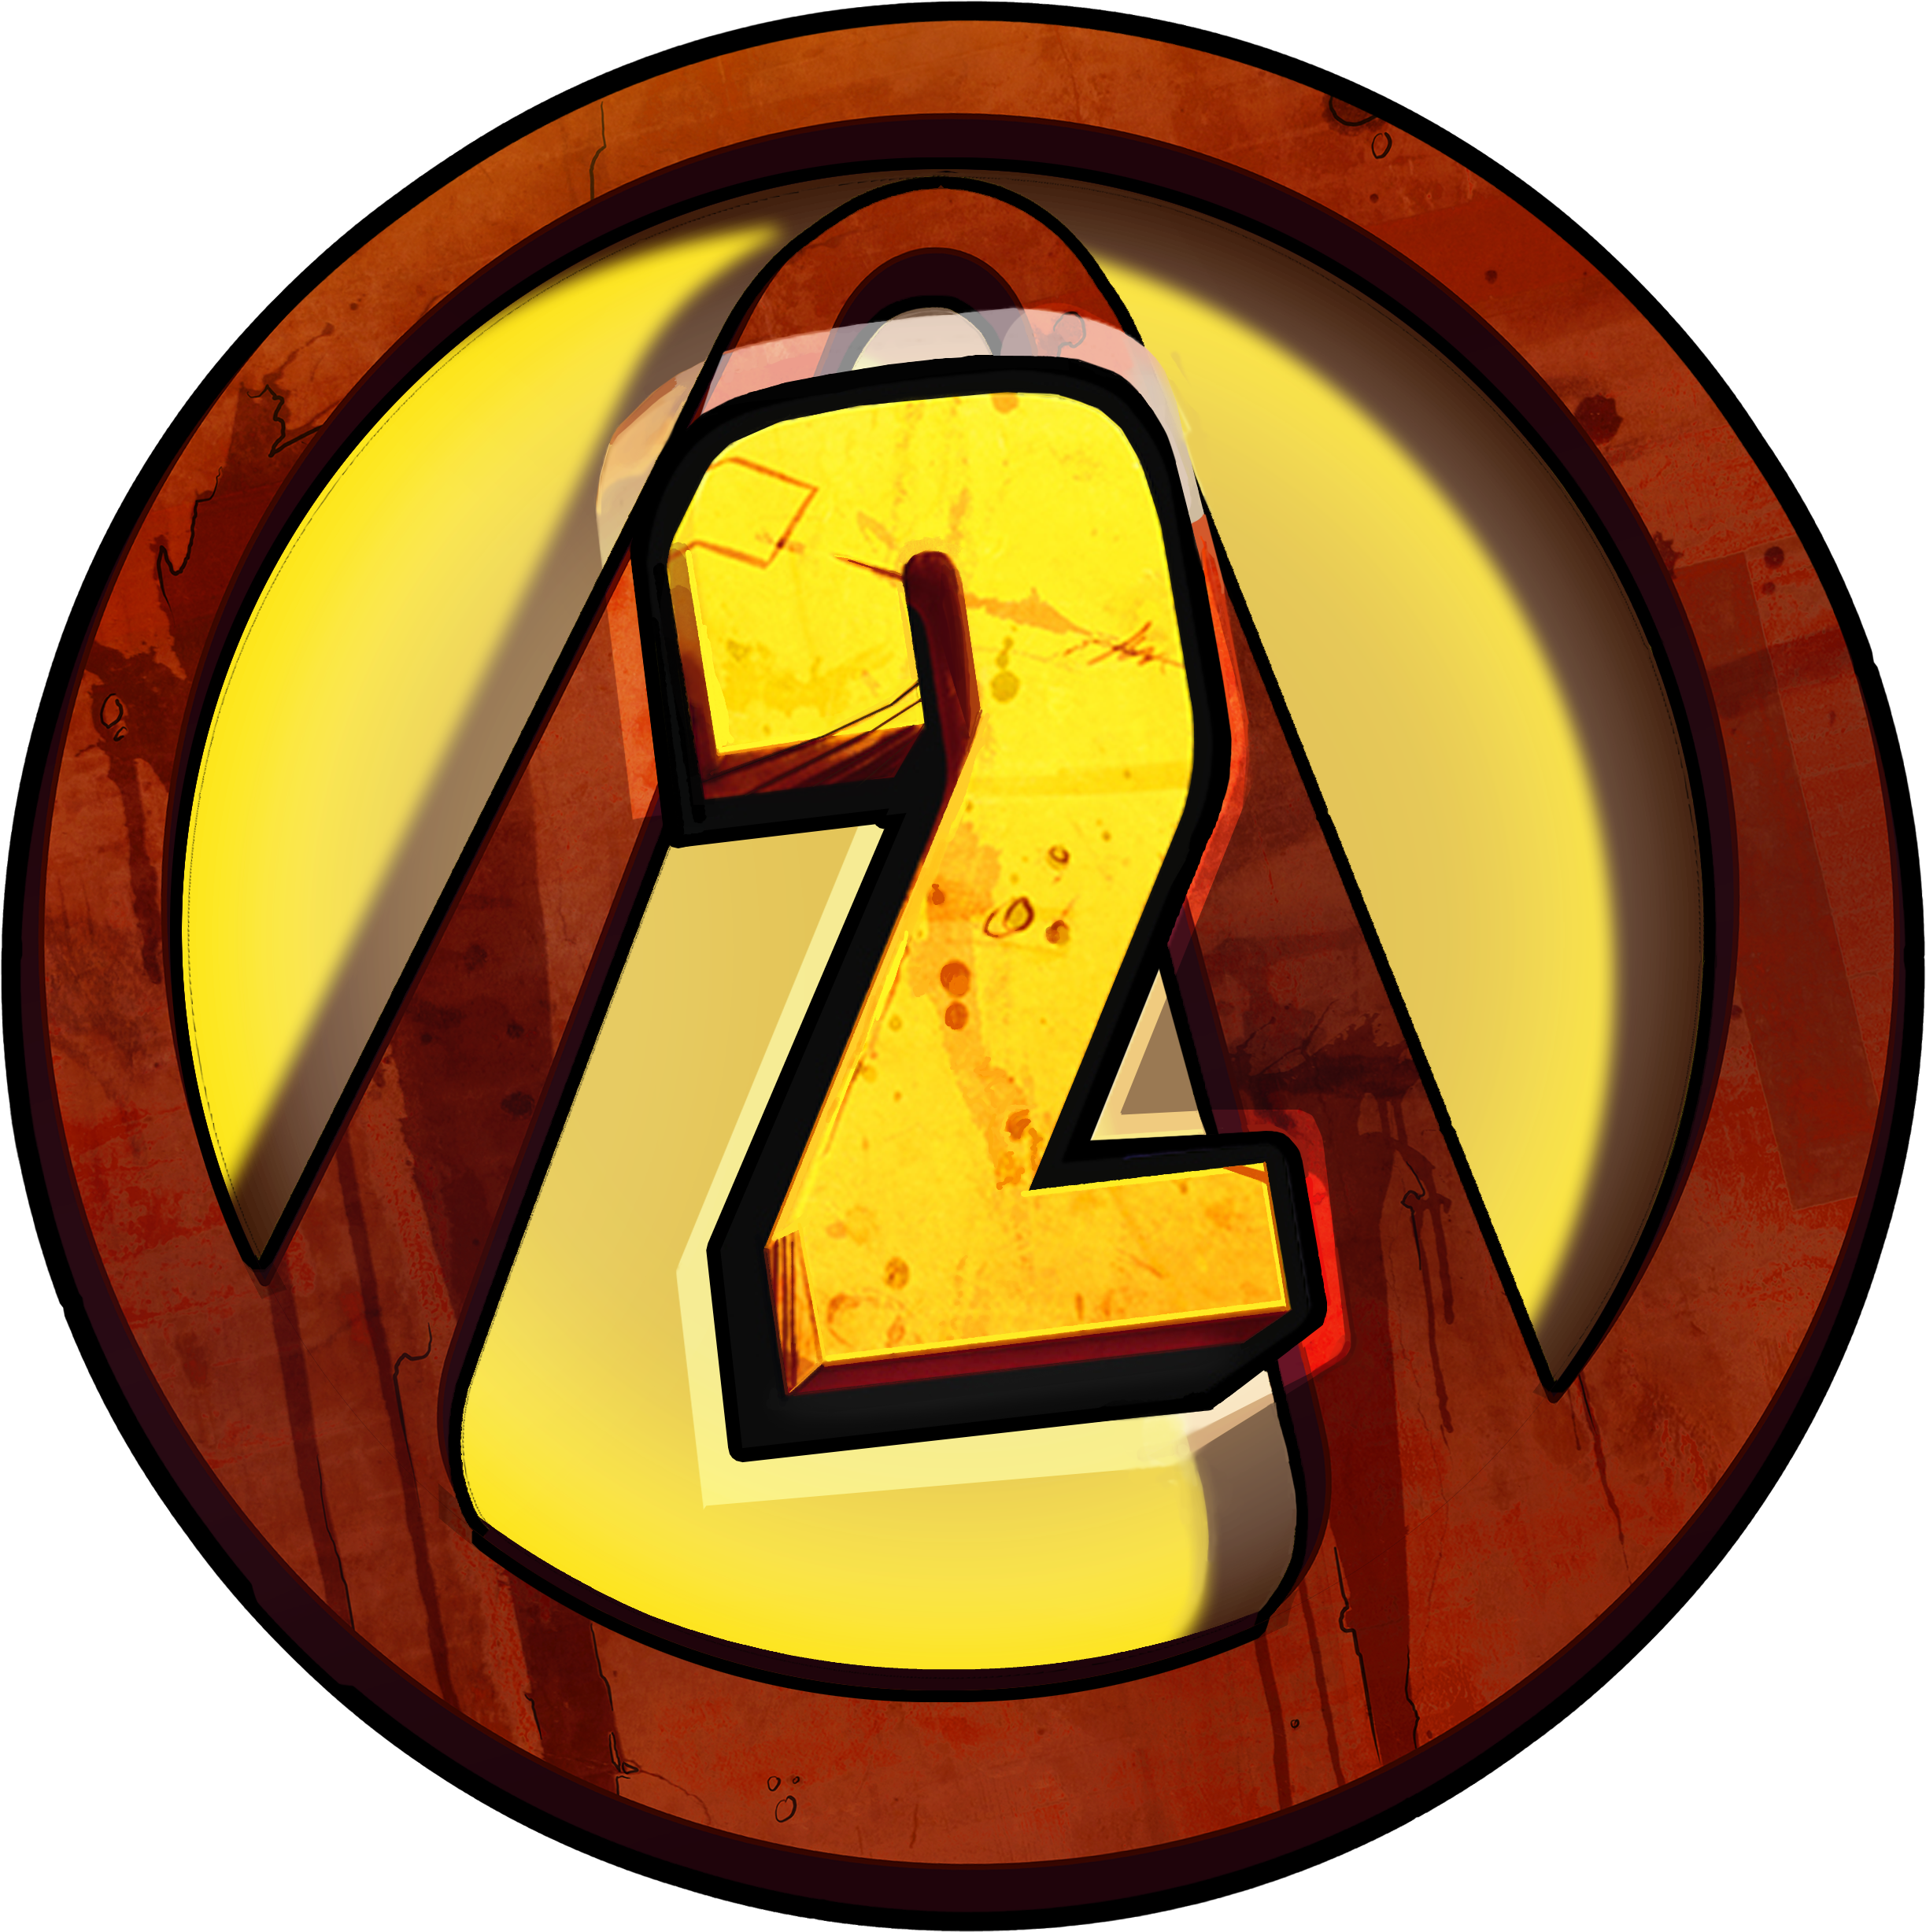 Borderlands 2 Icon at Vectorified.com | Collection of Borderlands 2